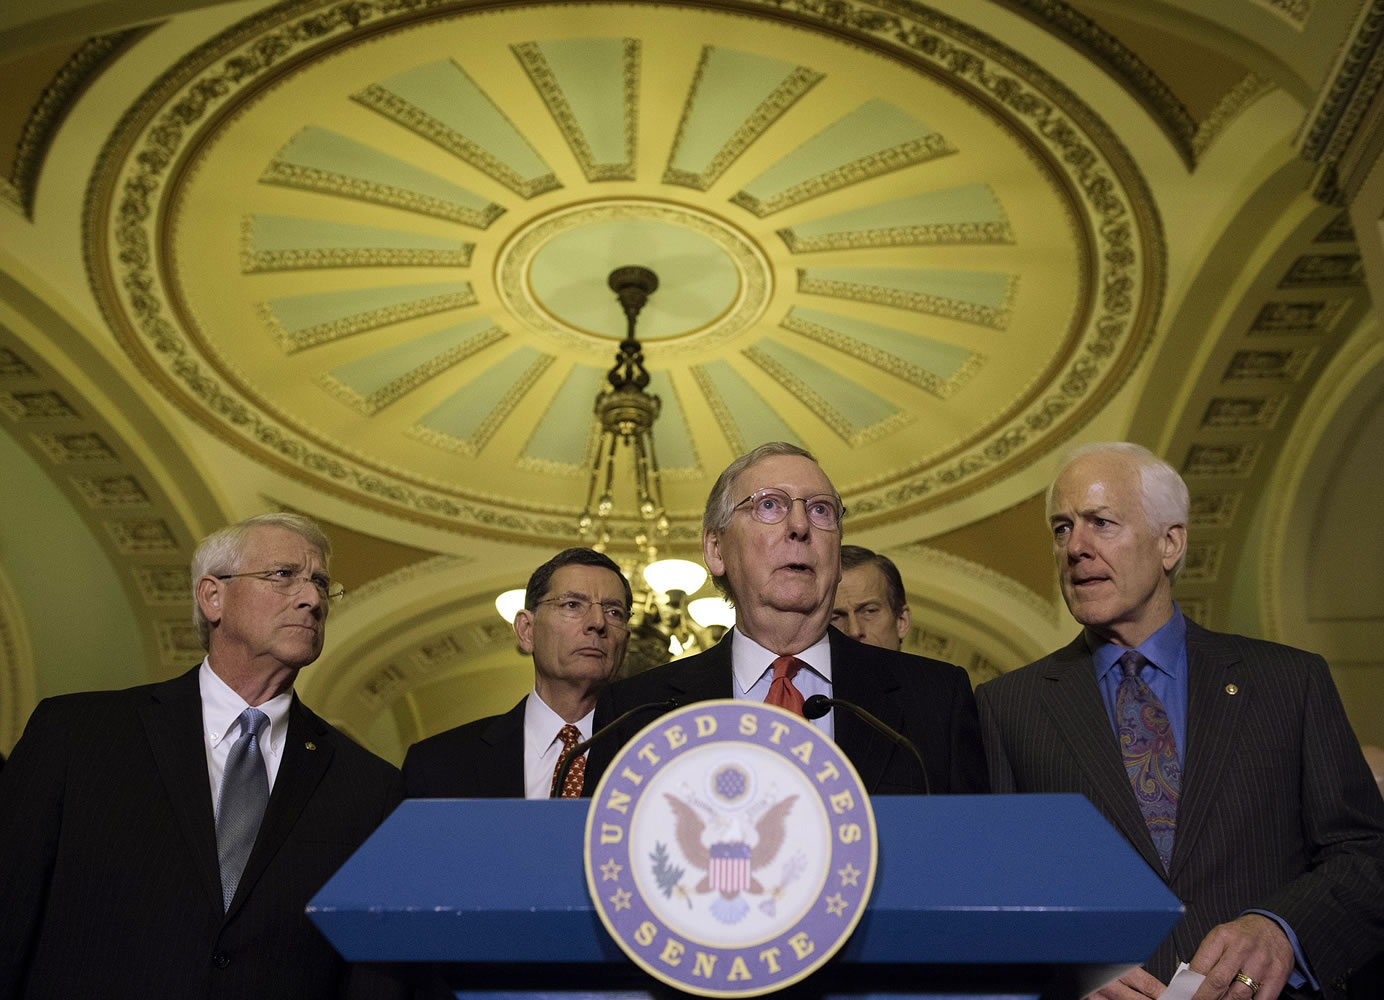 Senate Majority Leader Mitch McConnell, R-Ky. addresses the media Tuesday in the U.S. Capitol in Washington. From left are Sen. Roger Wicker, R-Miss., Sen. John Barrasso, R-Wyo., Sen.